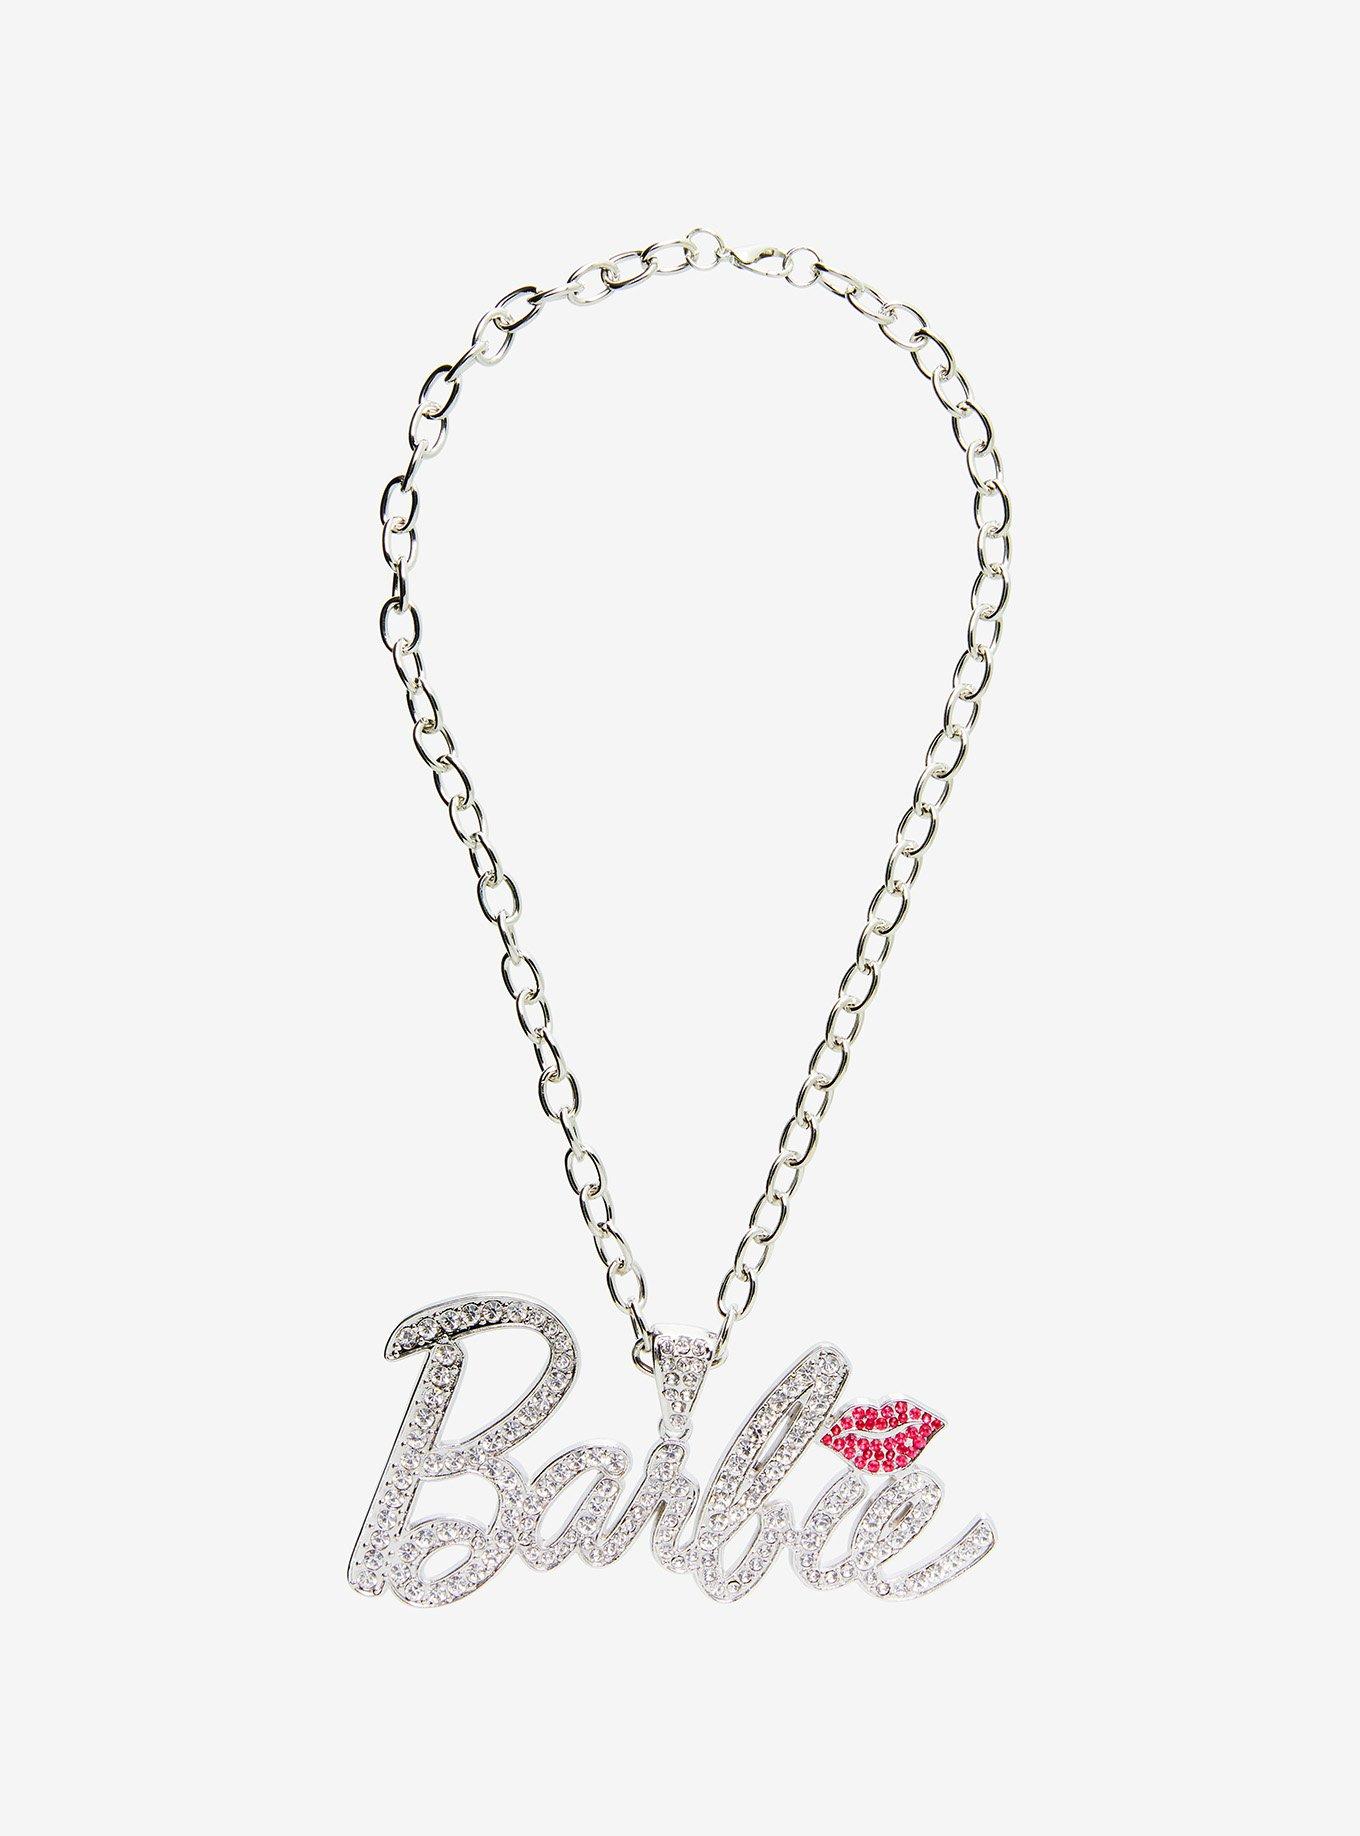 Angel Name Plate Necklace, Hot Topic